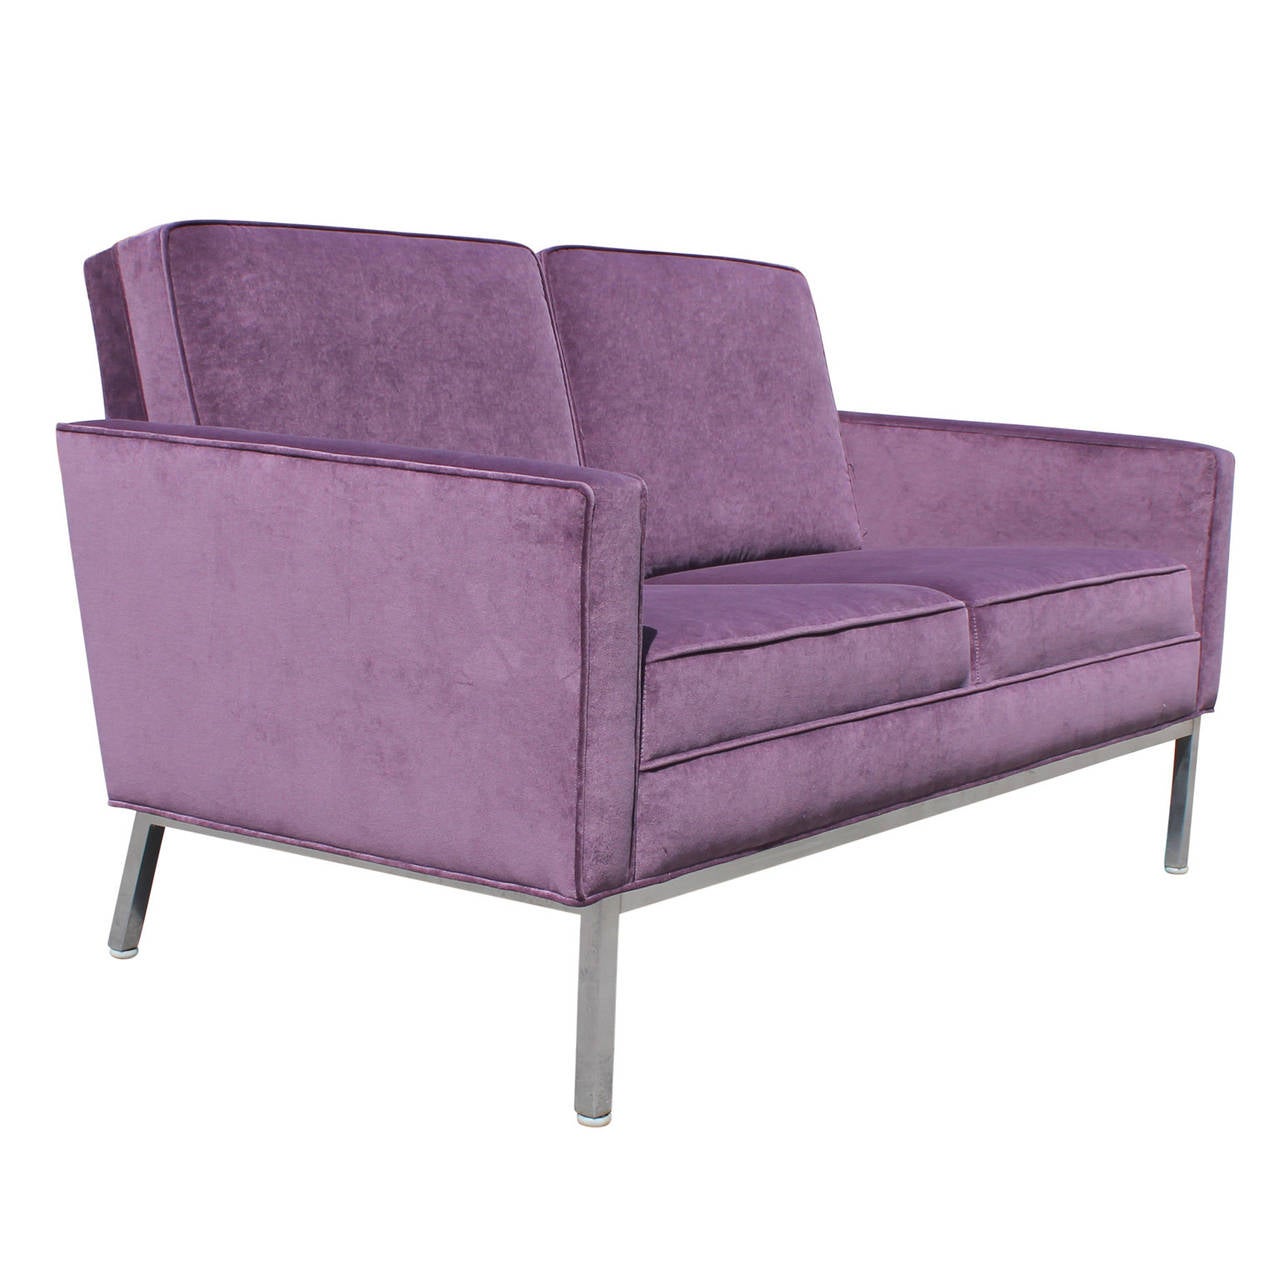 Ultra luxe loveseat / sofa freshly upholstered in purple velvet. Sofa sits atop a stainless base.